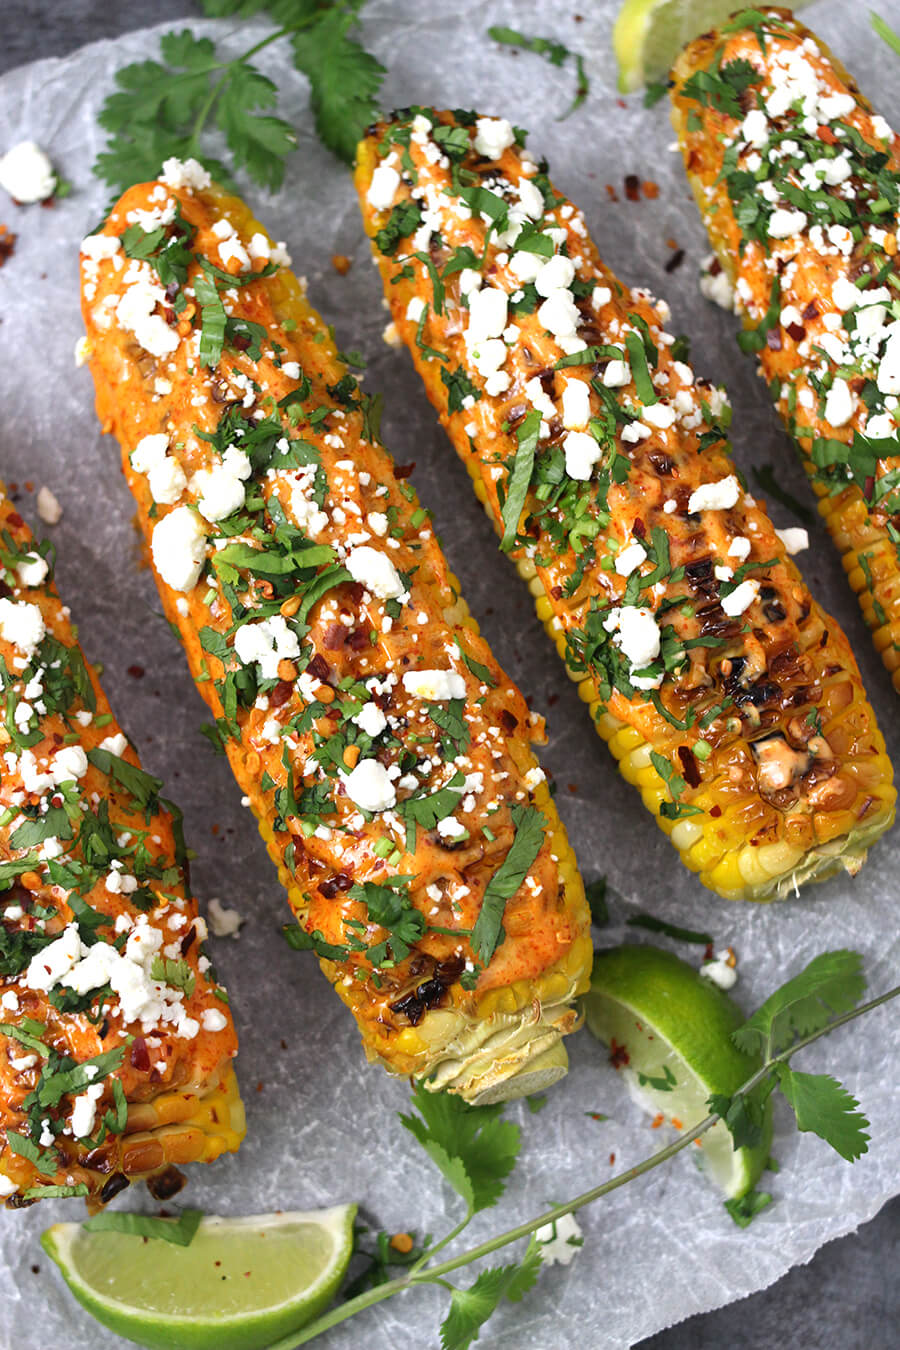 Mexican Corn on The Cob / Street Corn / Bhutta Recipes / Elote / Cinco De Mayo / Indian Street Food / Mexican Food / Gluten Free Recipes / Kids Friendly / Healthy Snacks / Best Snacks / Corn on the cob in oven / Corn on the cob in grill / Carnival food/ Holiday Recipes / Labor day recipes / barbecue Recipes 